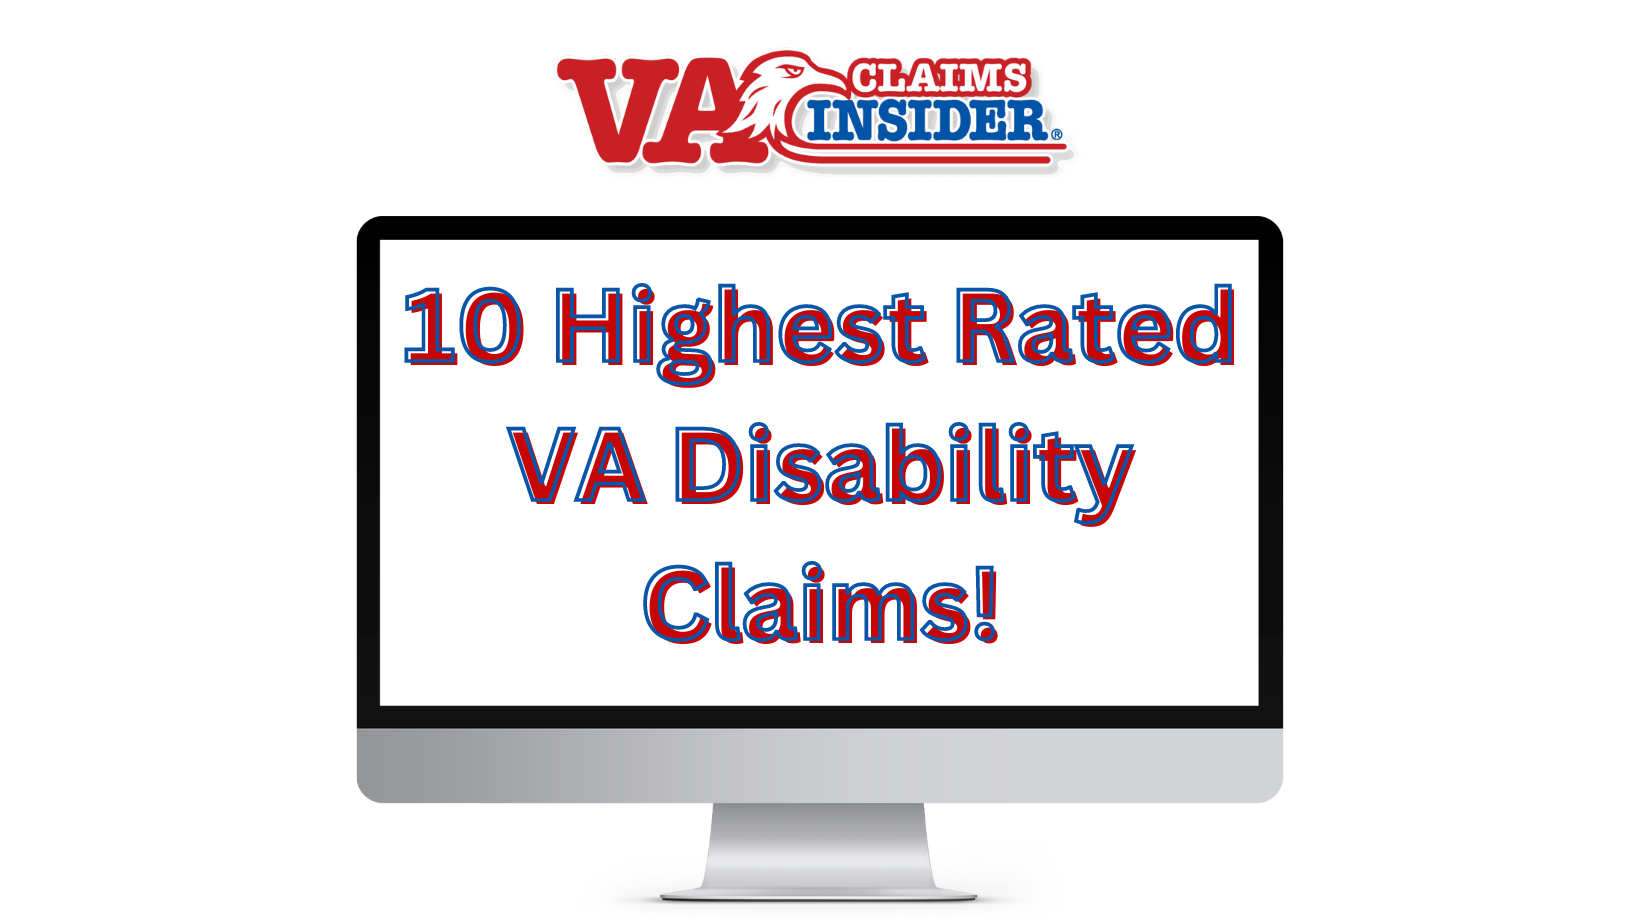 Top 10 Highest Rated VA Disability Claims